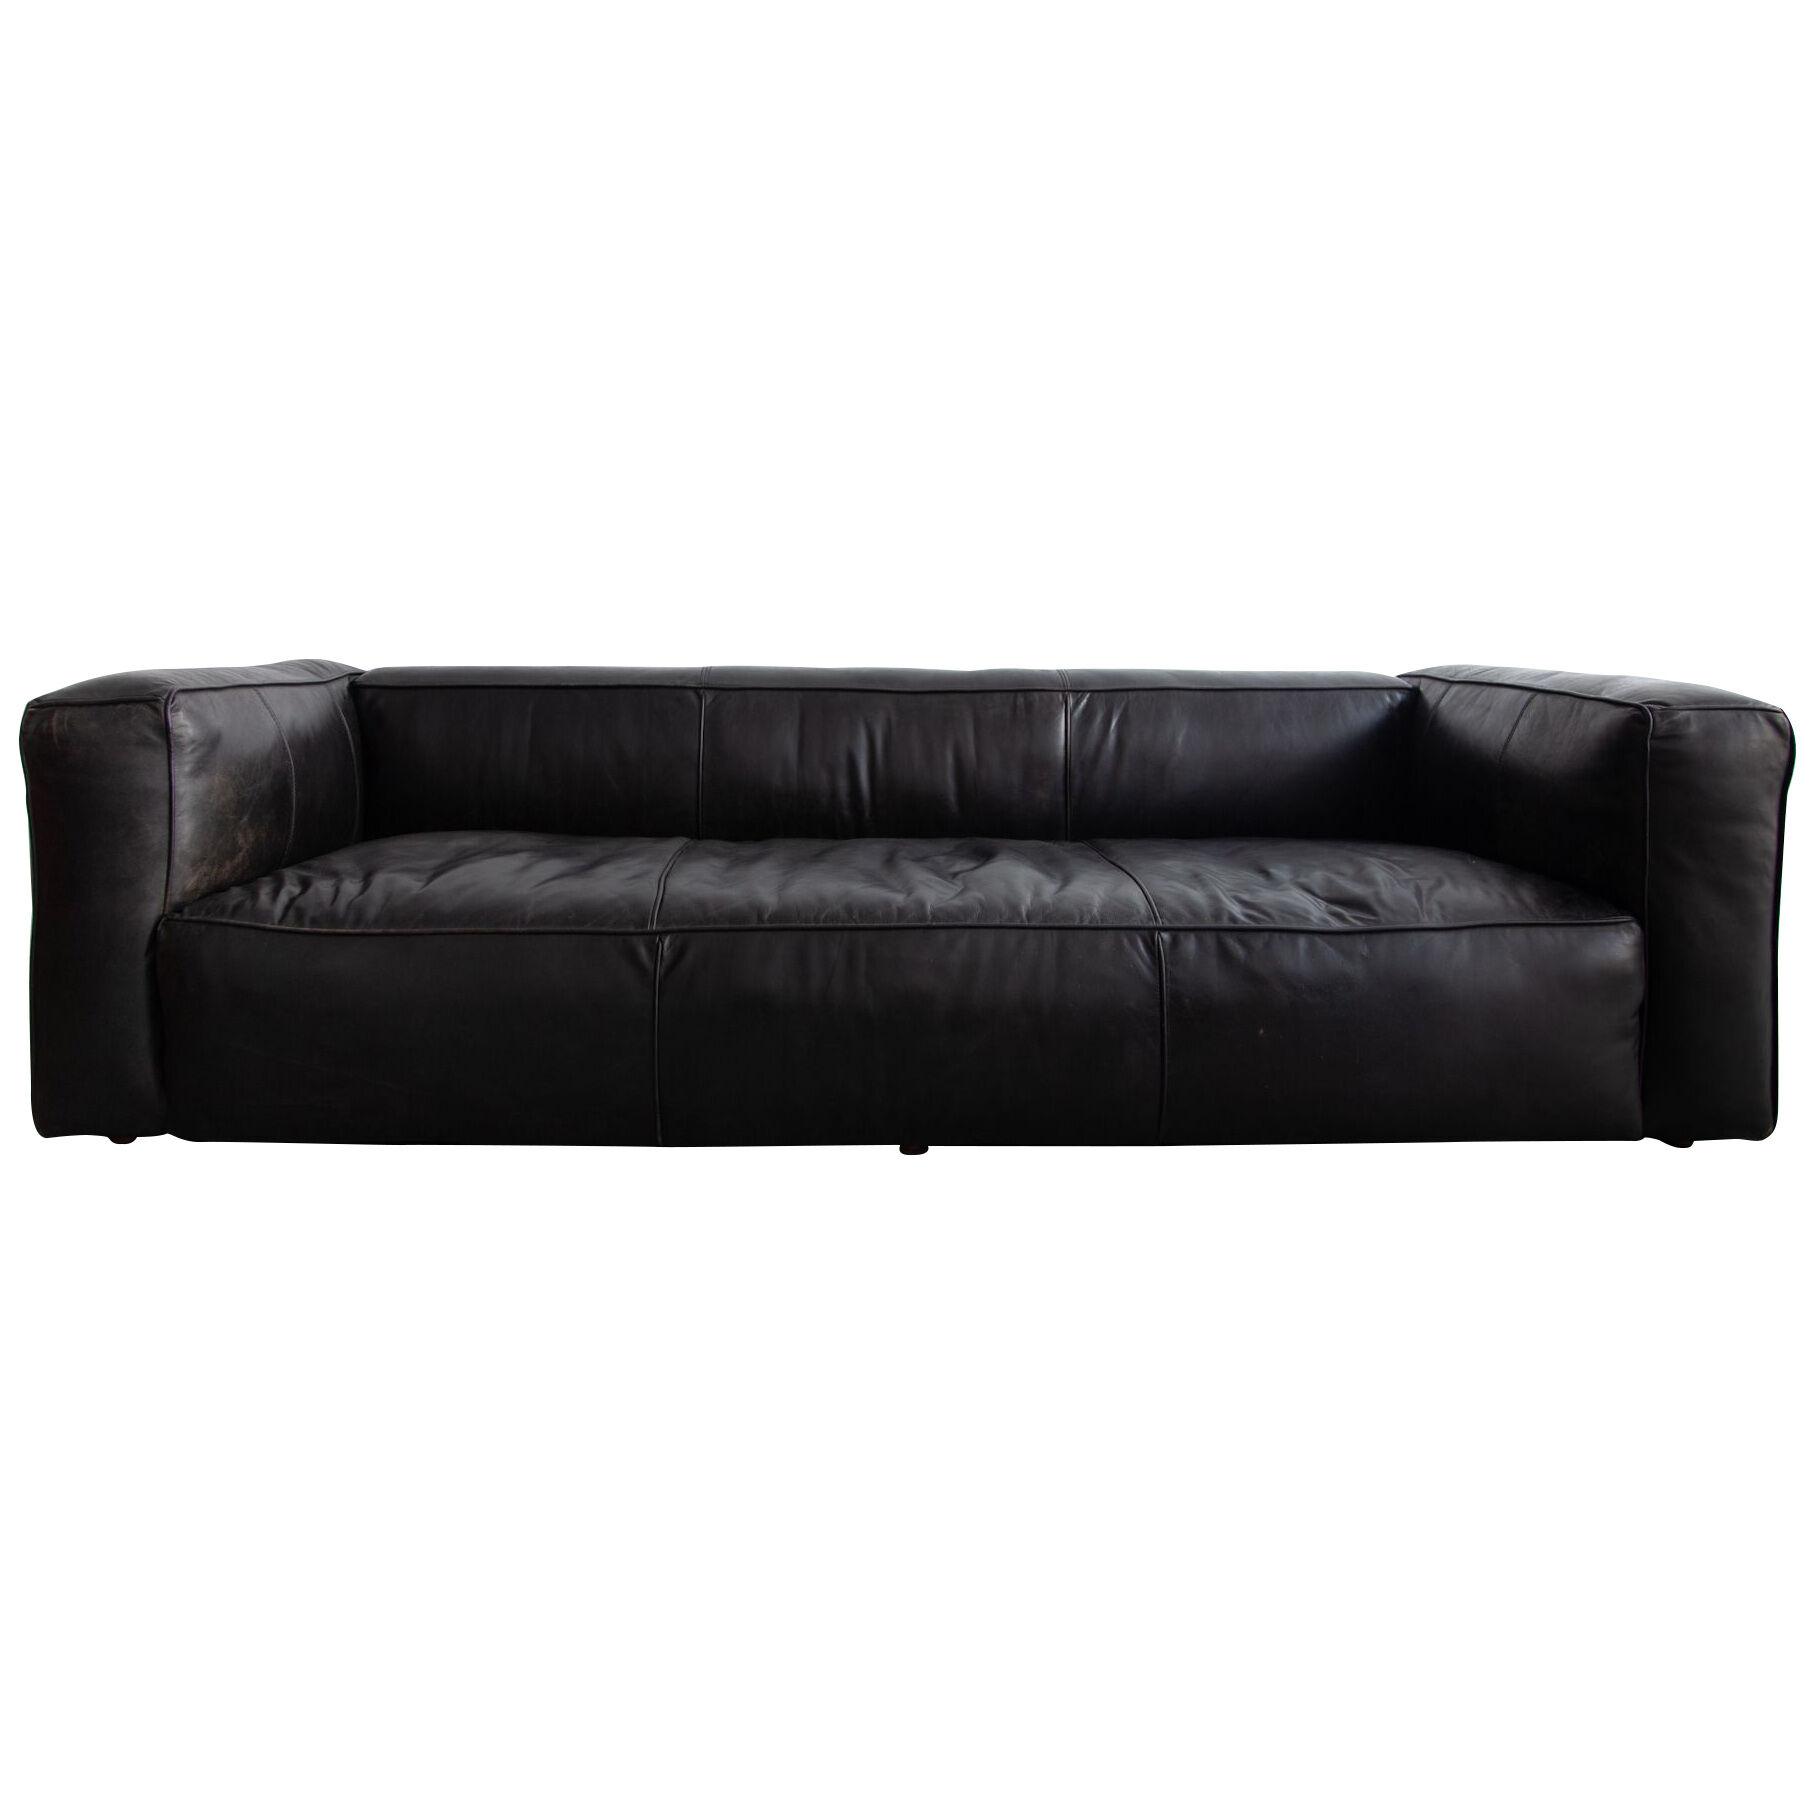 Large Black Leather Lounge Sofa, Daybed, 1980s